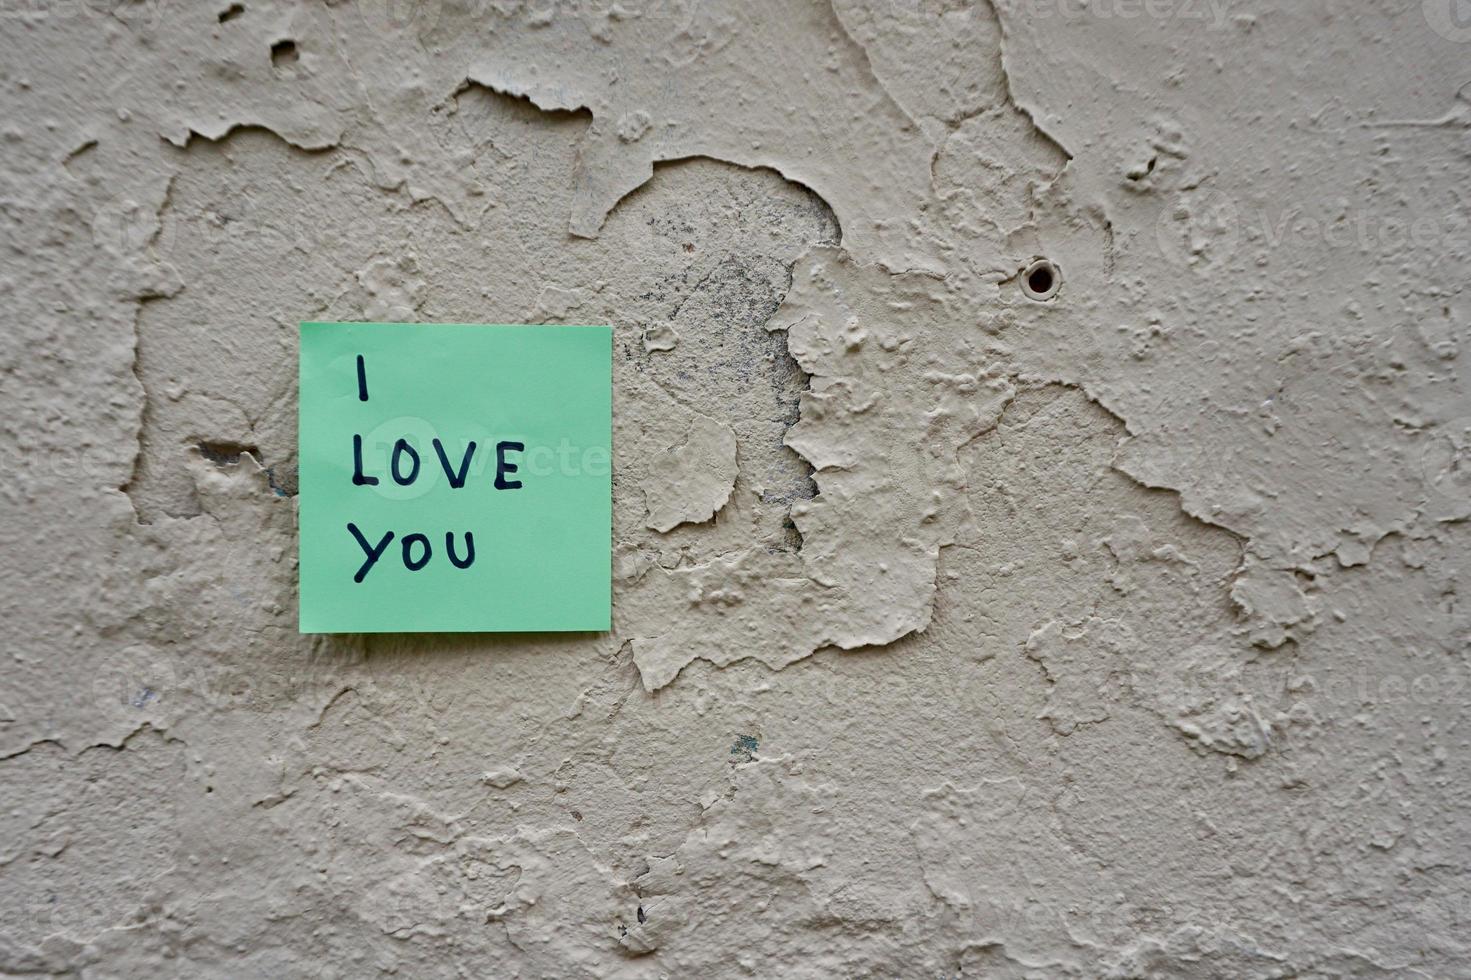 I love you message written on a paper photo